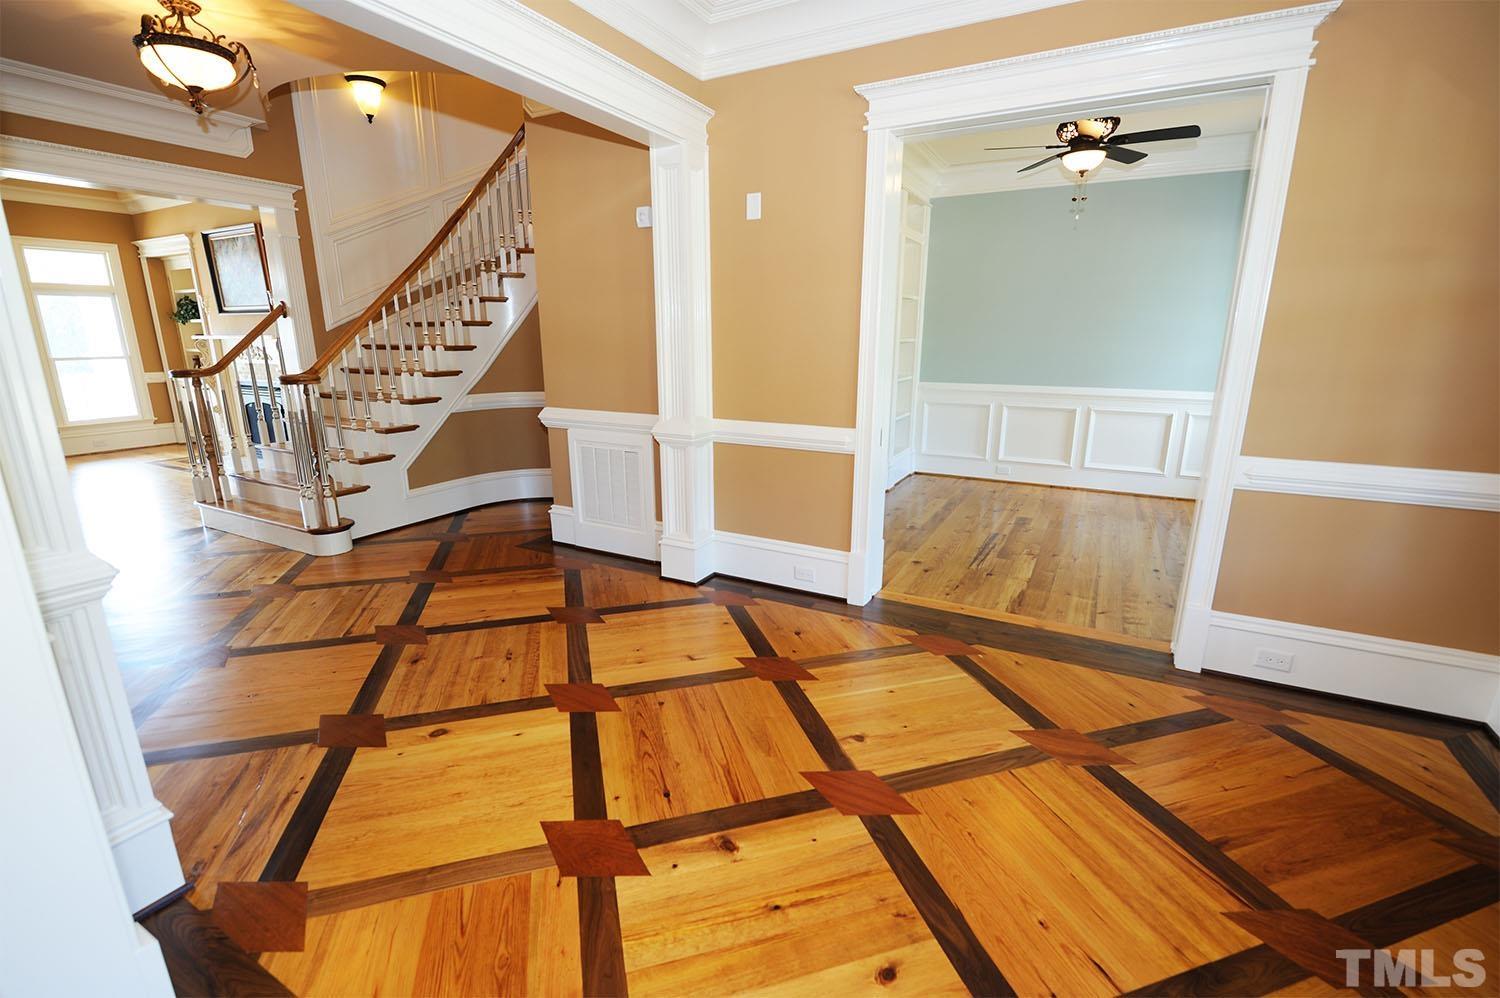 Caribbean Heart Pine hardwoods throughout foyer with custom design walnut and cherry accents. Headers above doorways are hand-painted and glazed in egg & dart pattern.